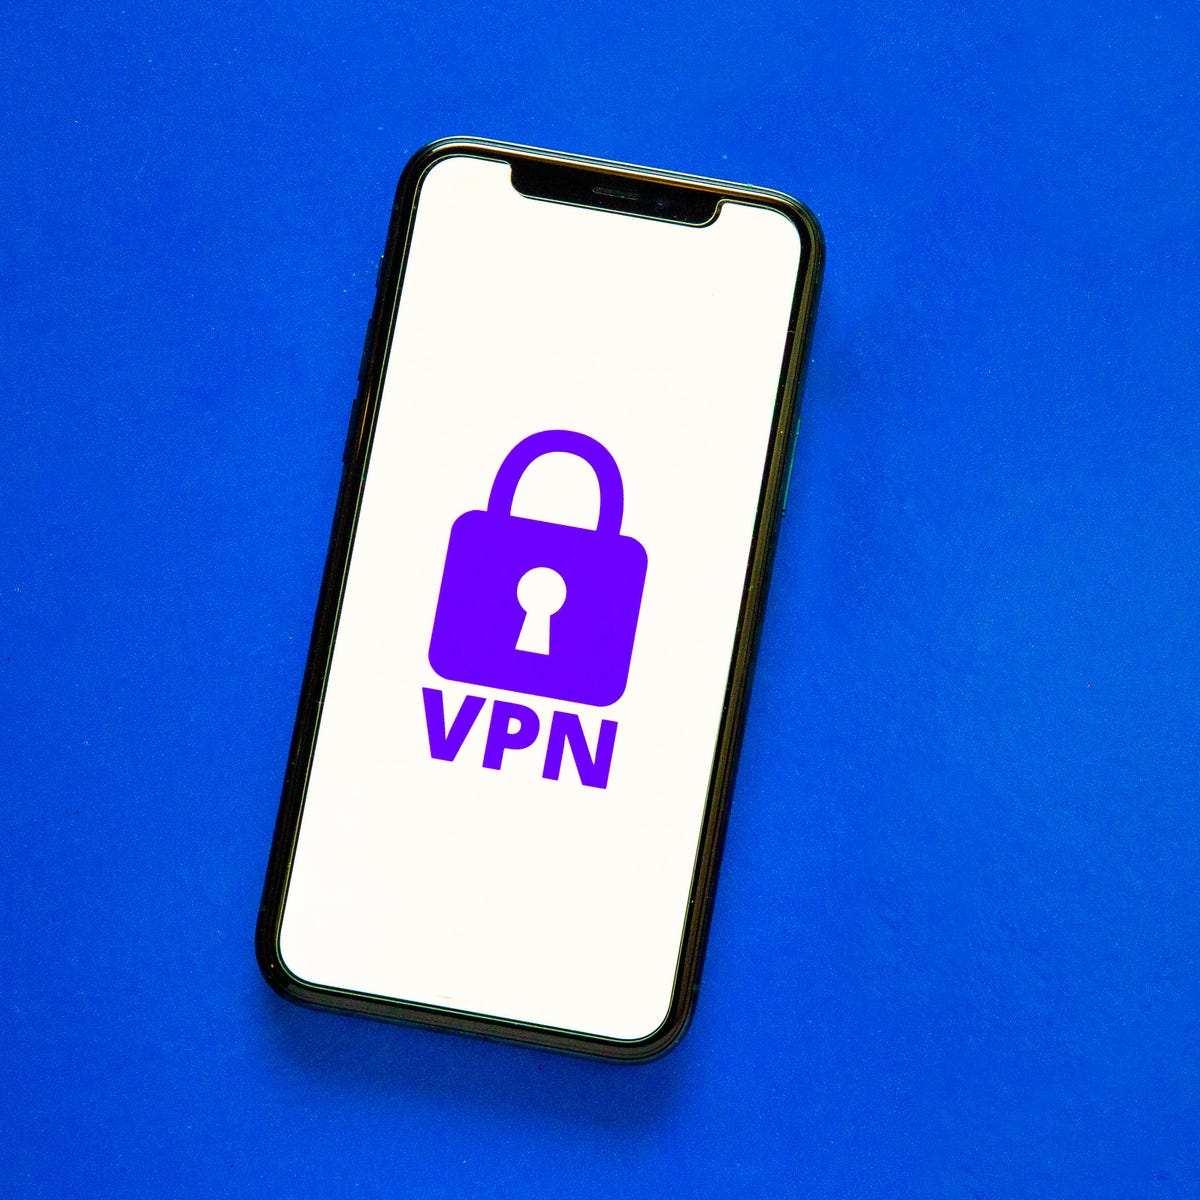 Essential Phone Privacy Booster Most People Don't Have? A Mobile VPN - CNET